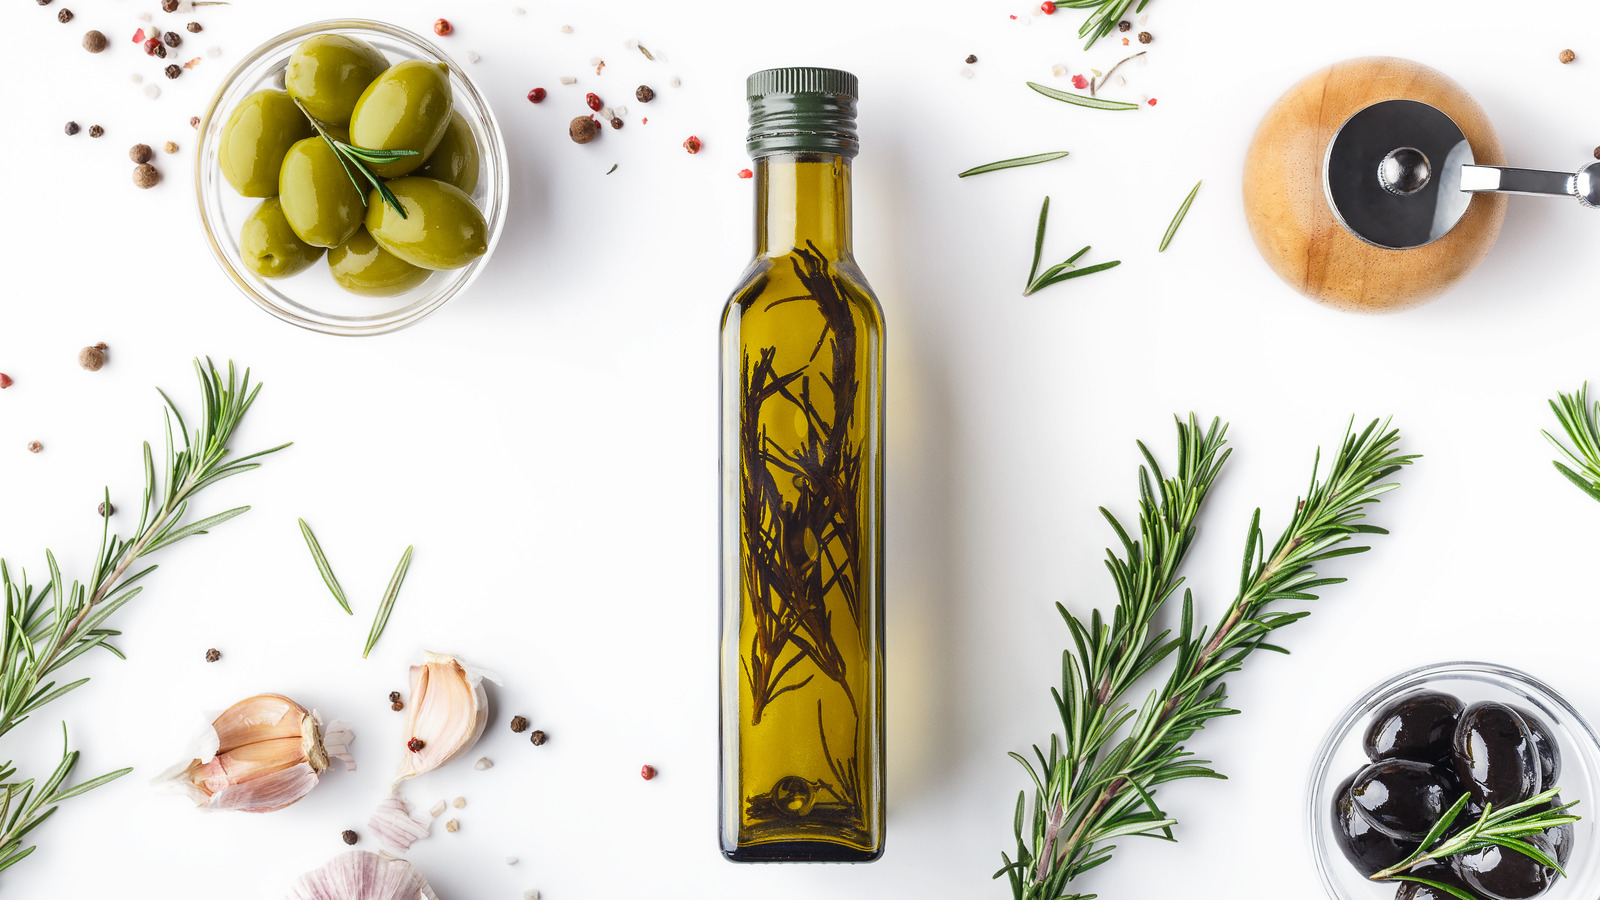 Do Restaurants Use Olive Oil In Their Cooking?